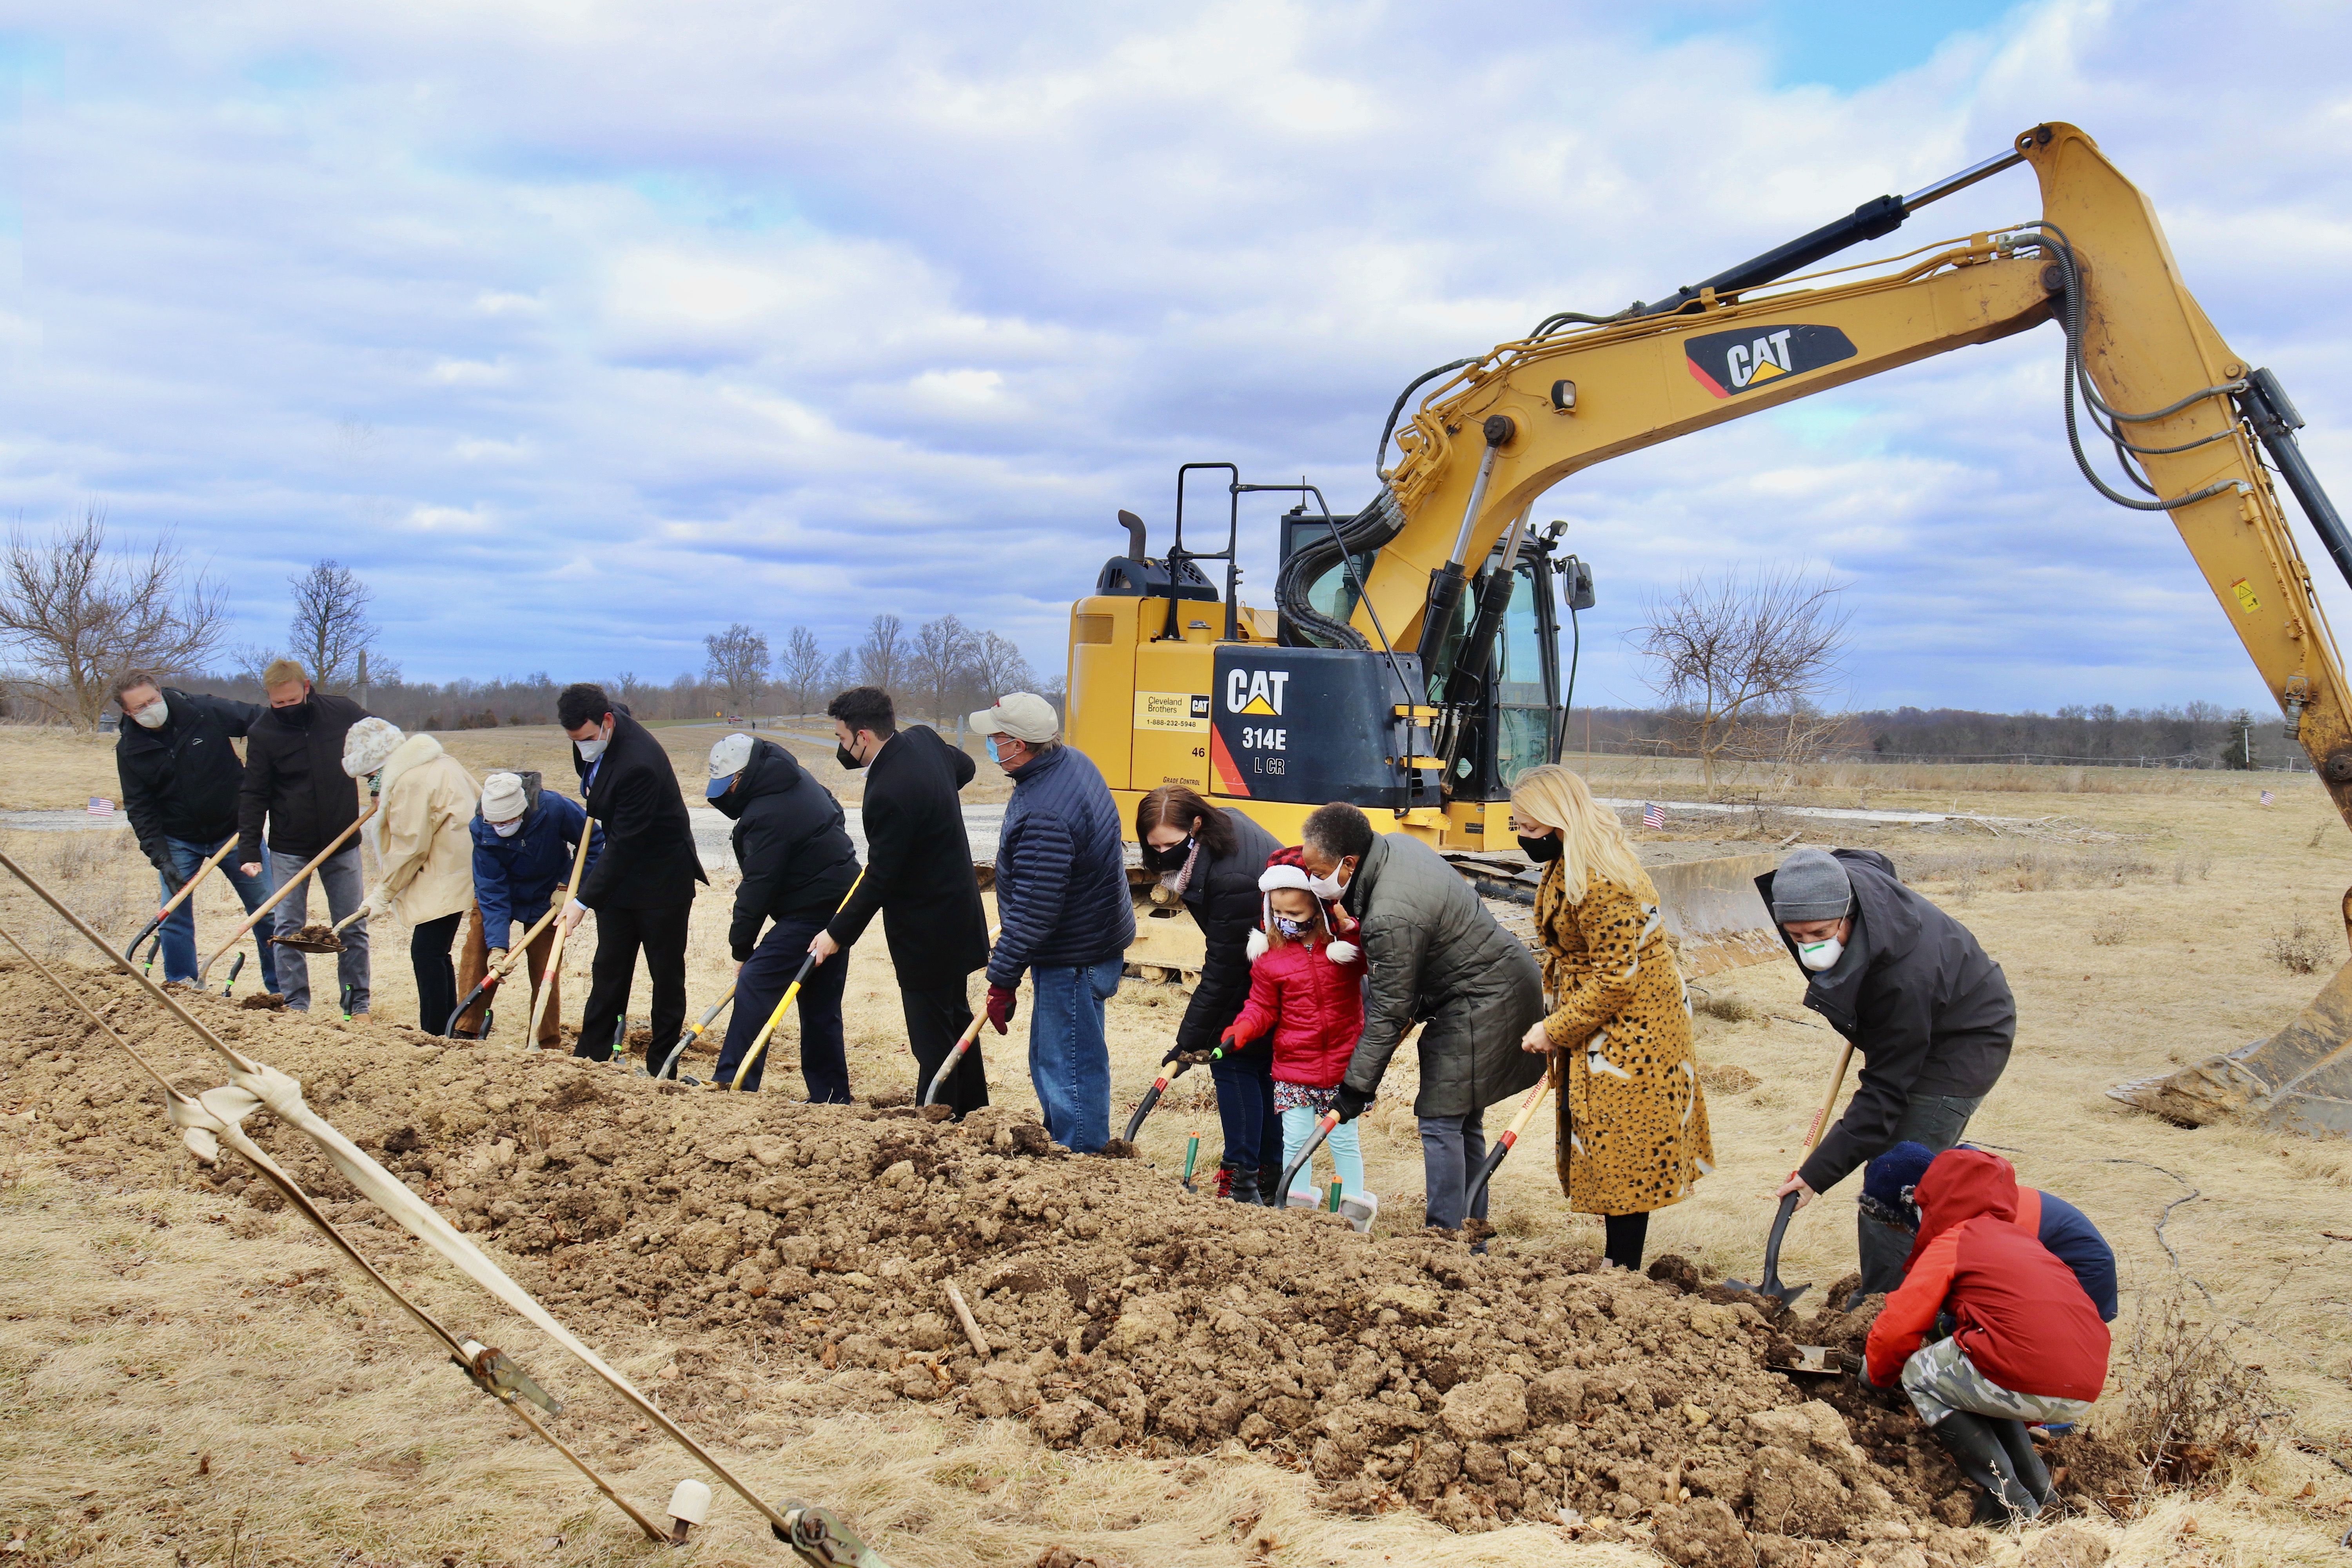 ADAMS COUNTY HISTORICAL SOCIETY BREAKS GROUND FOR NEW HOME